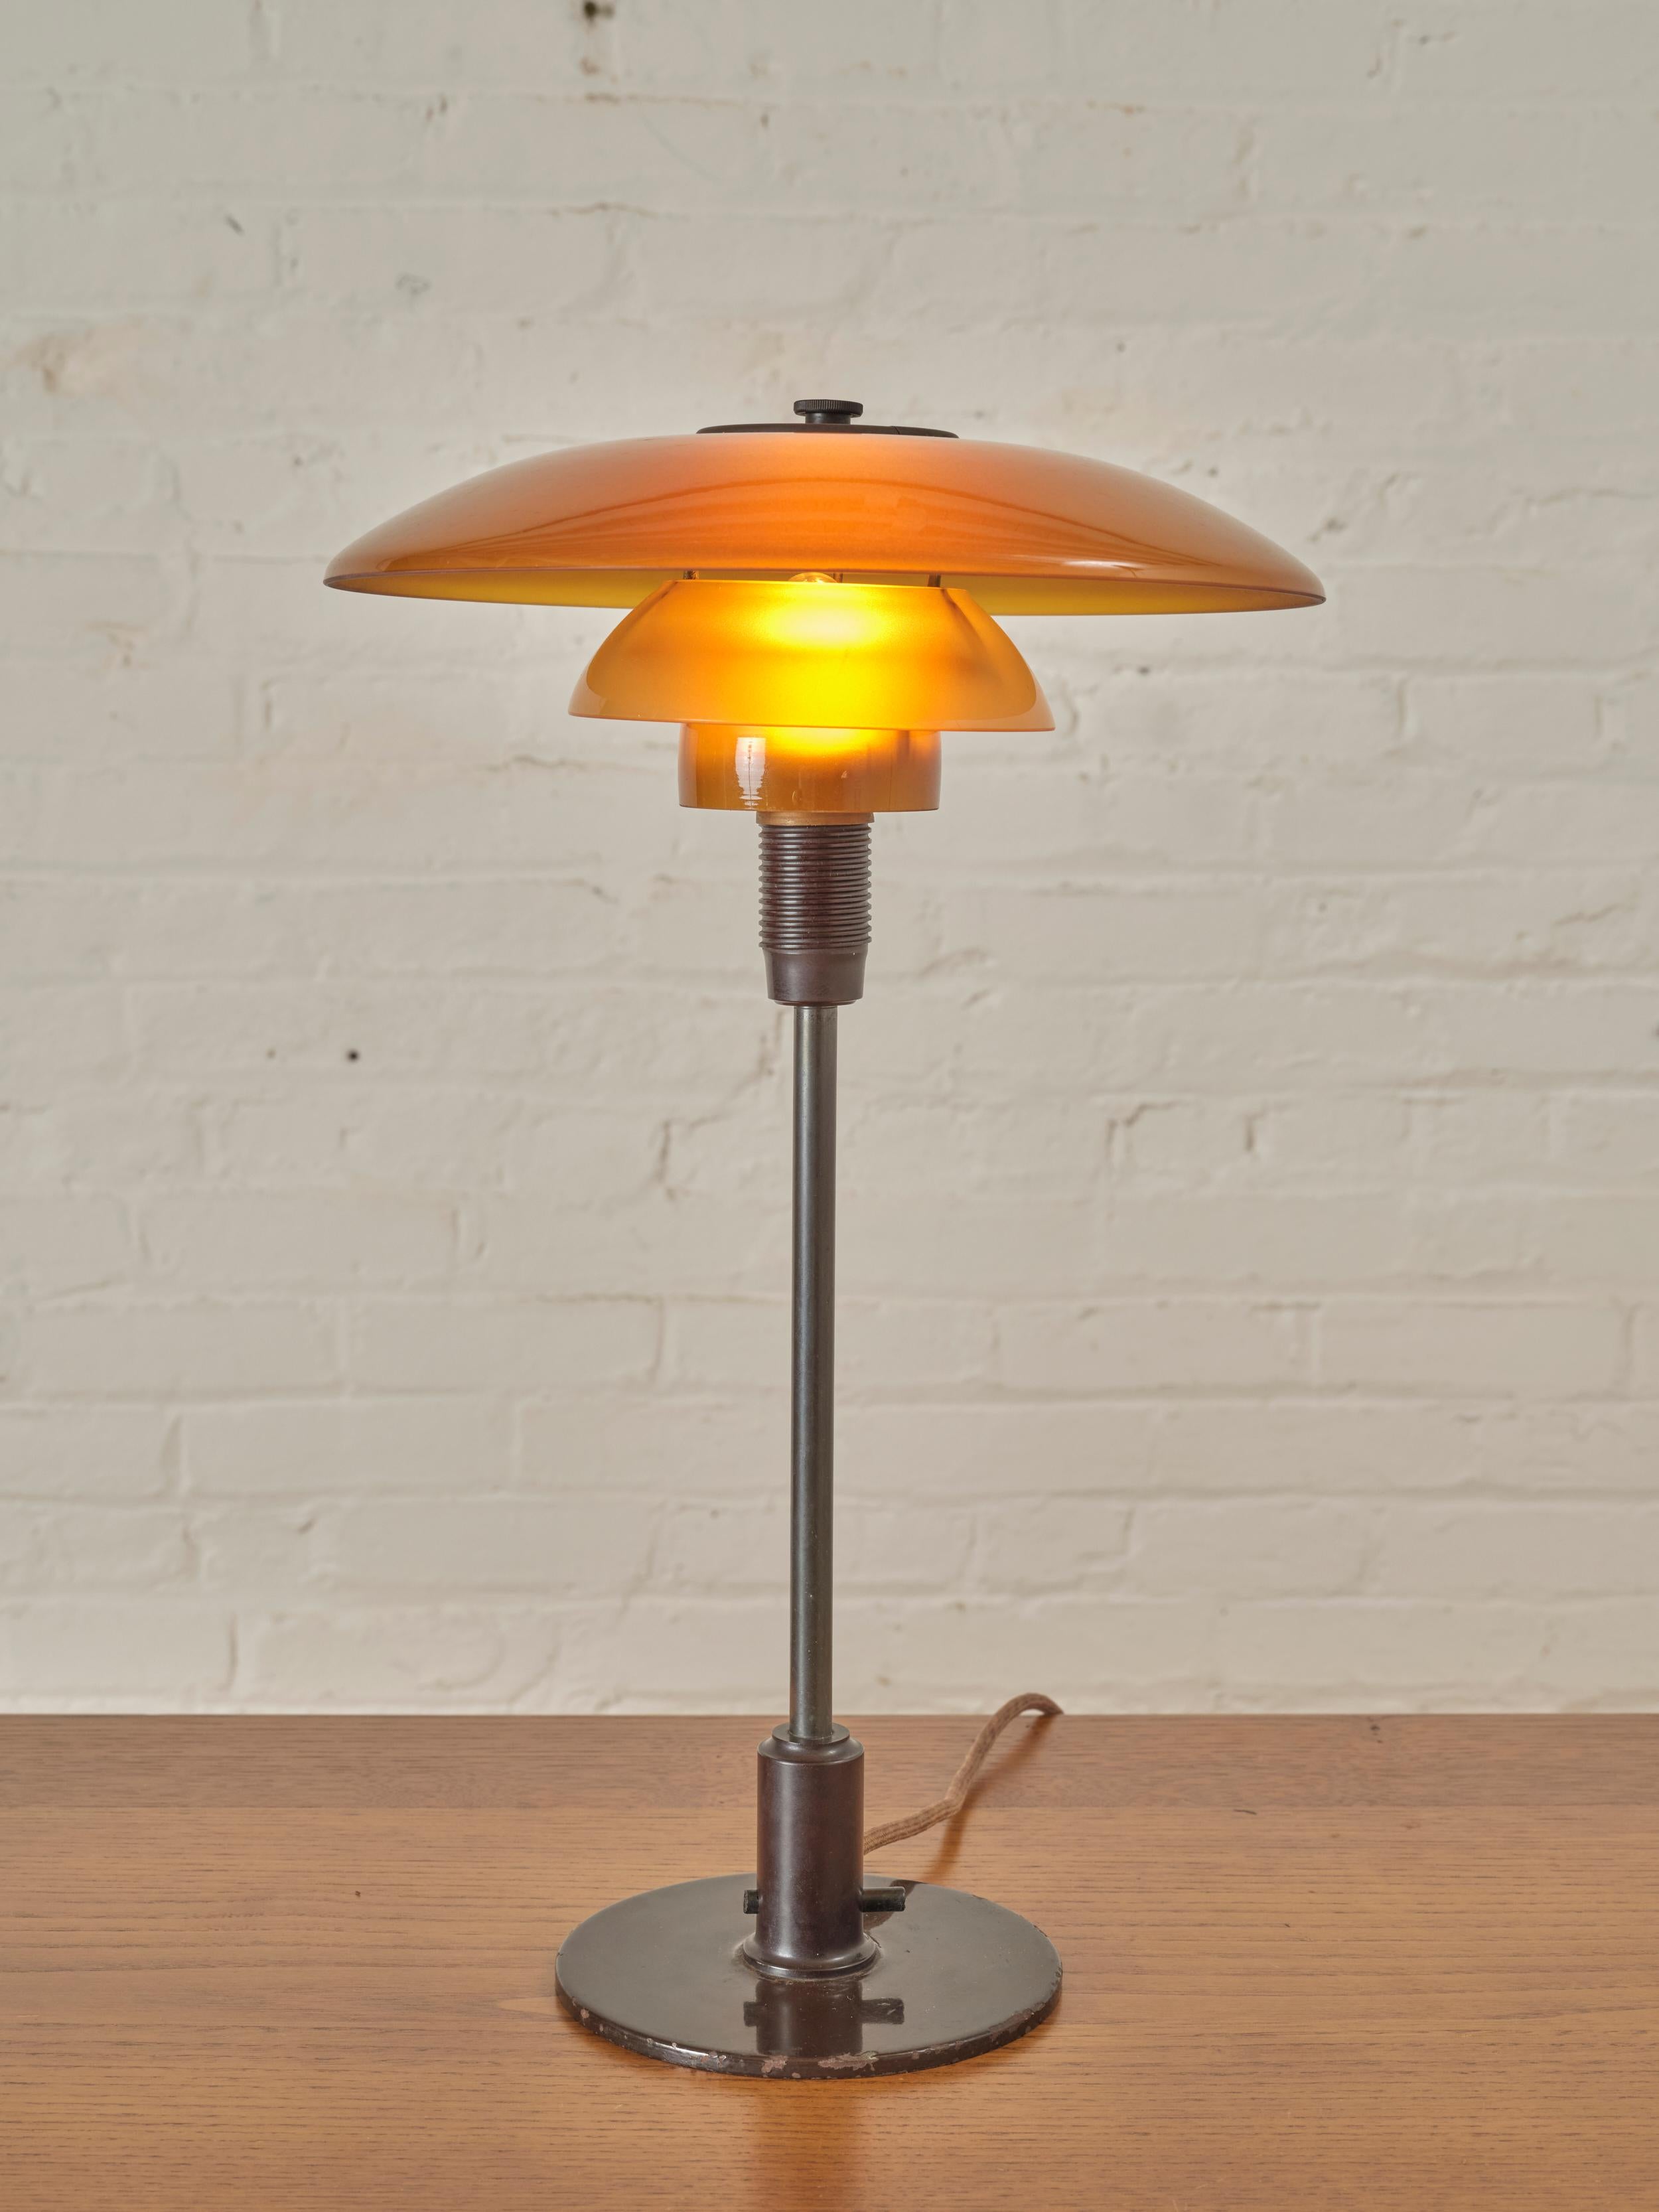 PH 4/3 Table by Poul Henningsen for Louis Poulsen, showcasing a 3-shade lamp system with handblown amber glass.

